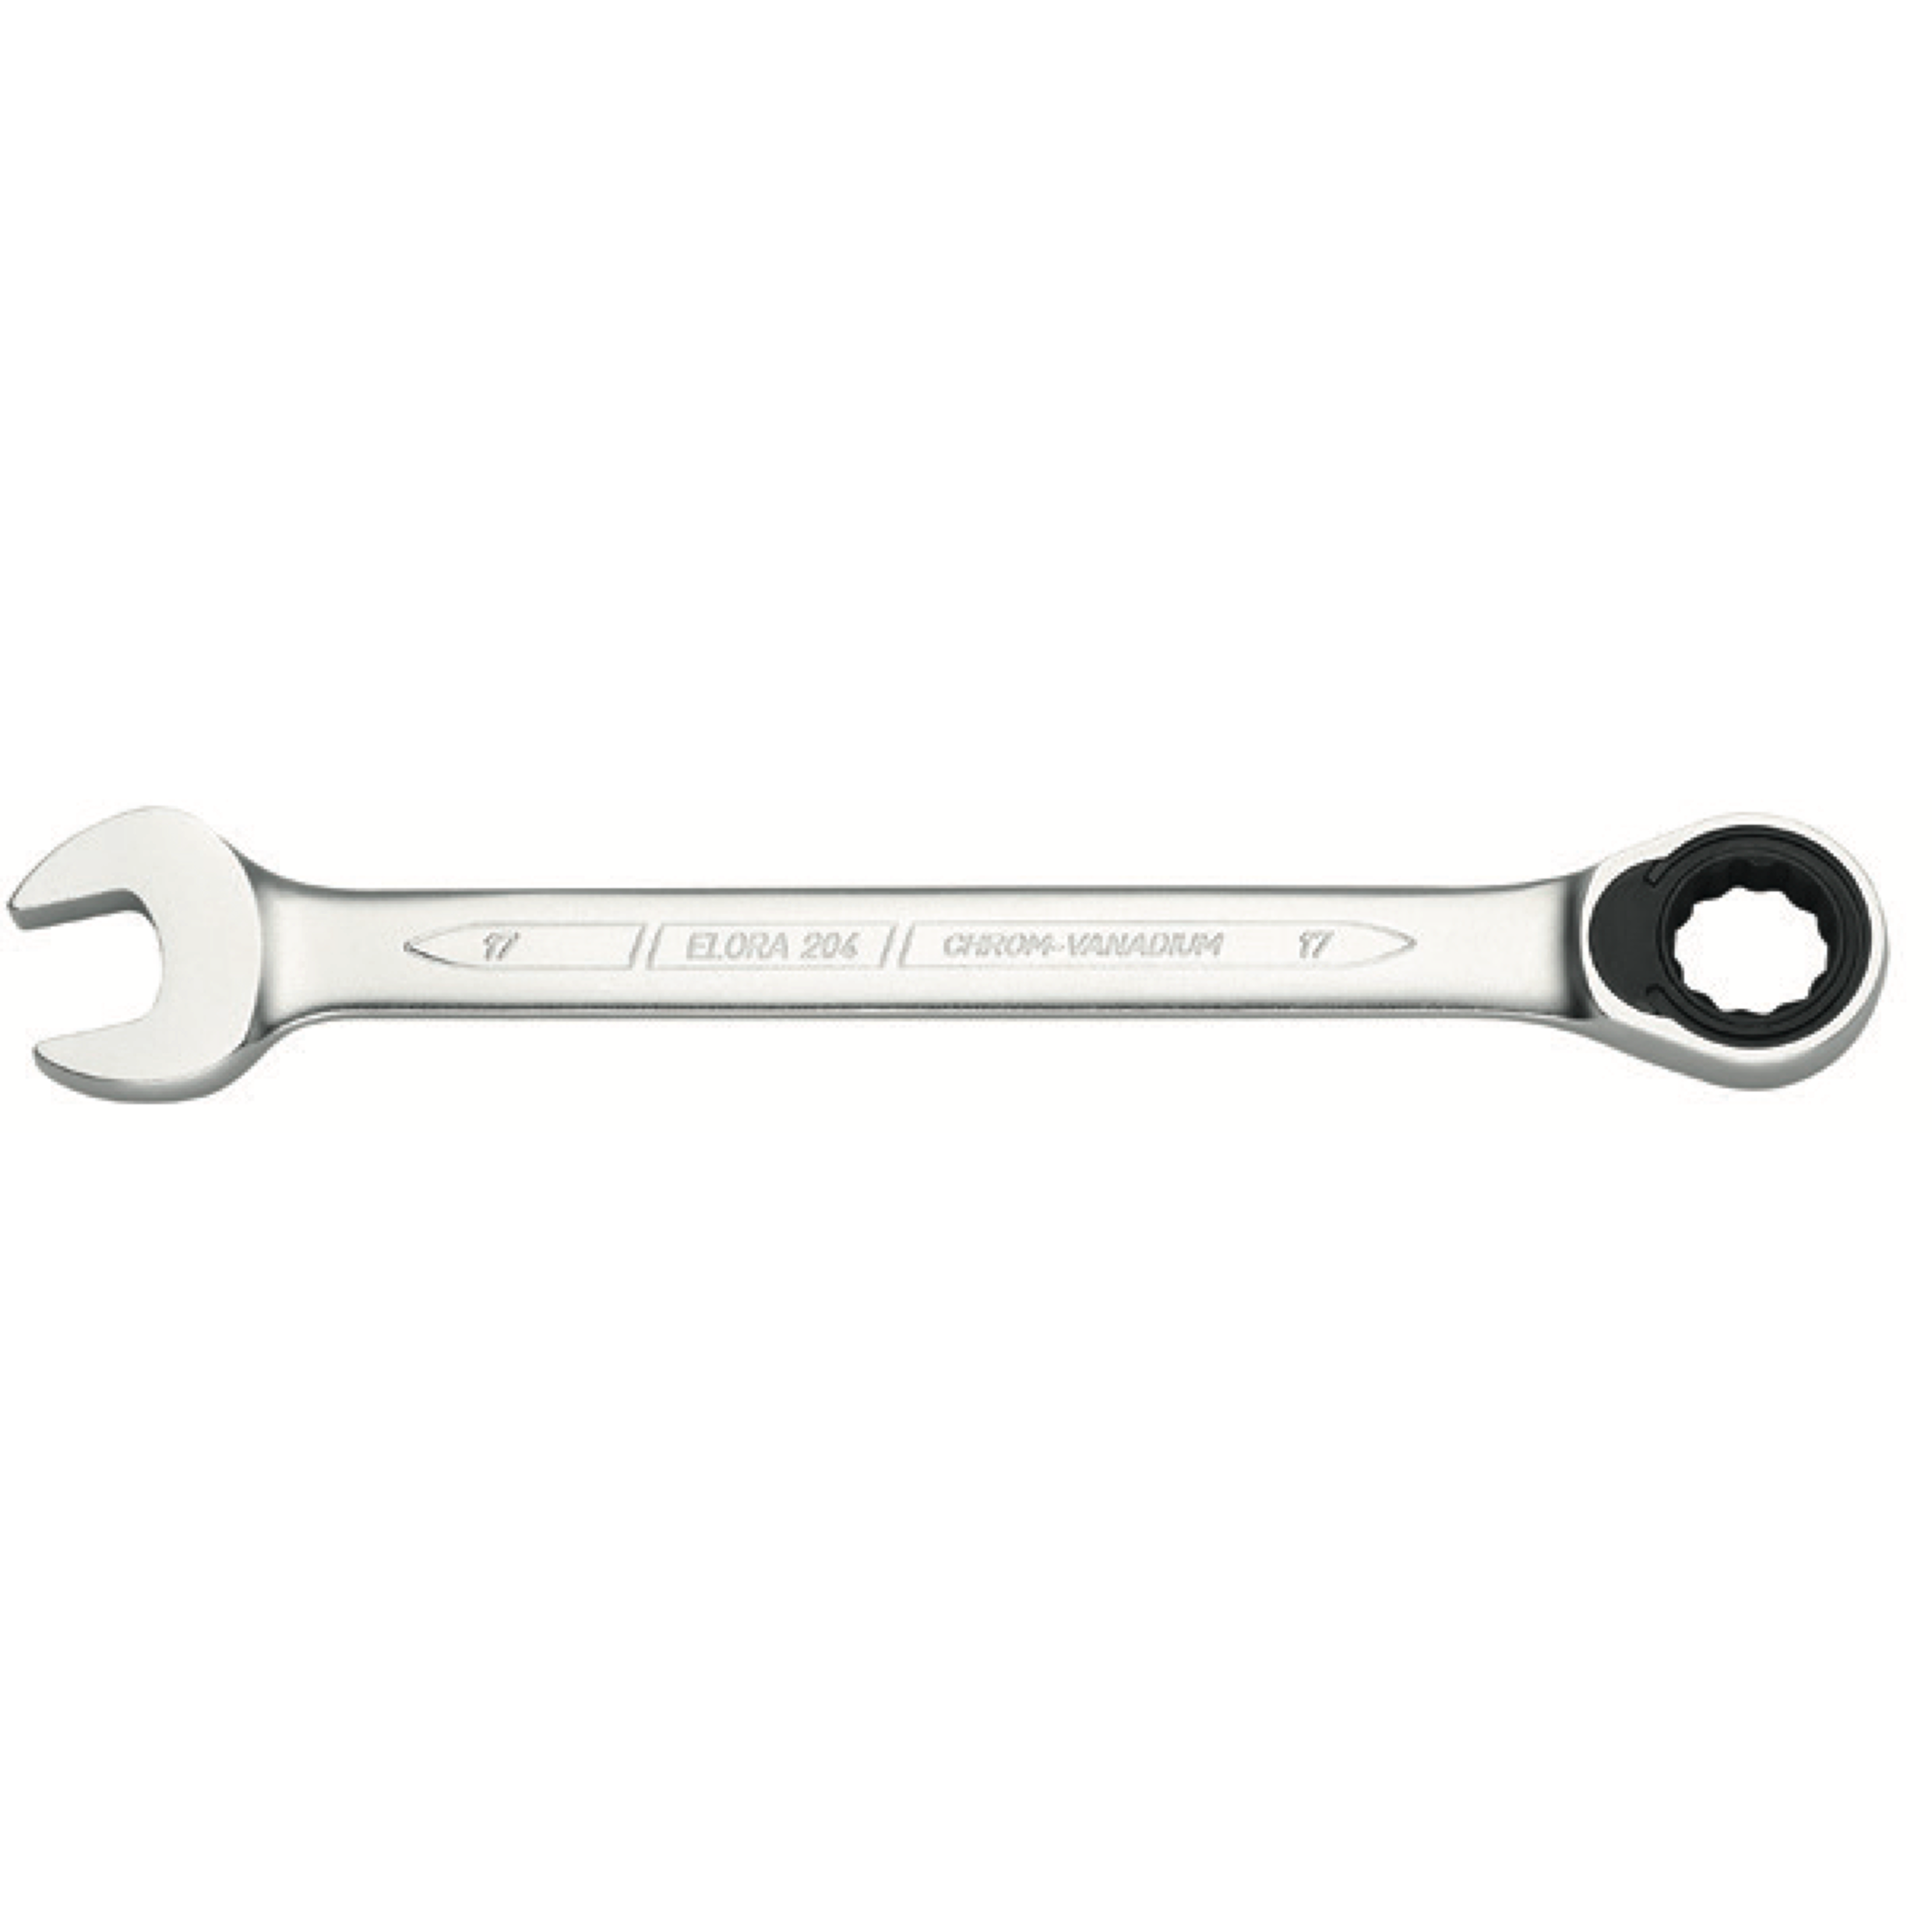 ELORA MS-10 Module Combination Spanner Ratchet (ELORA Tools) - Premium Combination Spanner from ELORA - Shop now at Yew Aik.